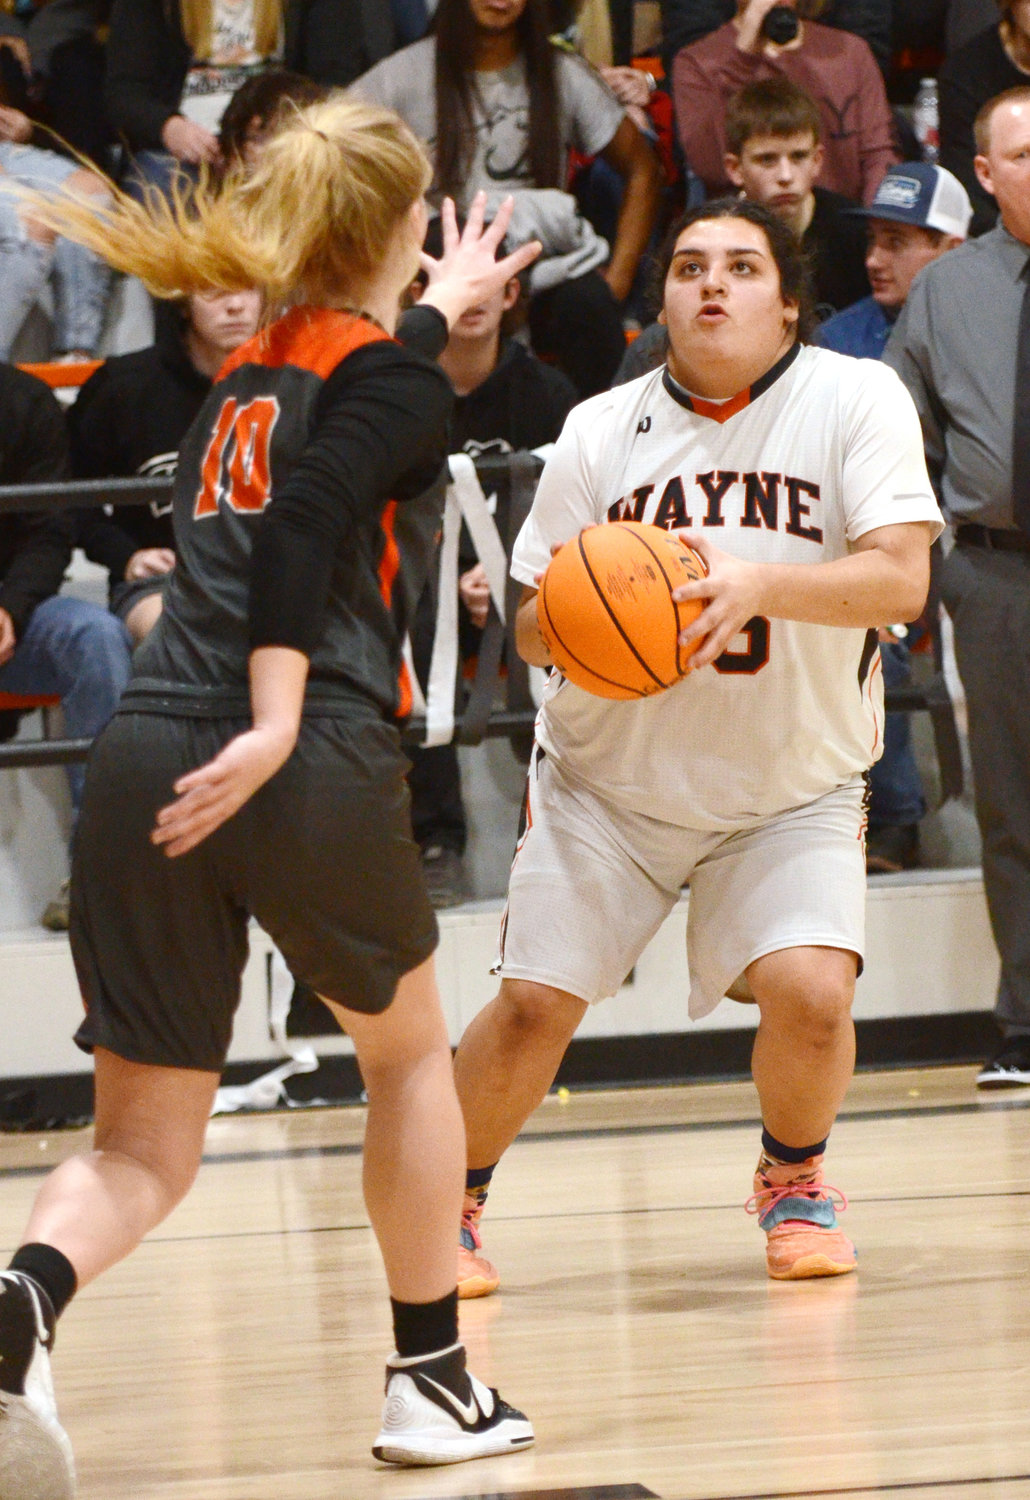 Wayne senior Mayce Trejo considers taking a shot against Konawa Friday night. The Bulldogs defeated the Tigers 52-41. Trejo scored four points in the win.